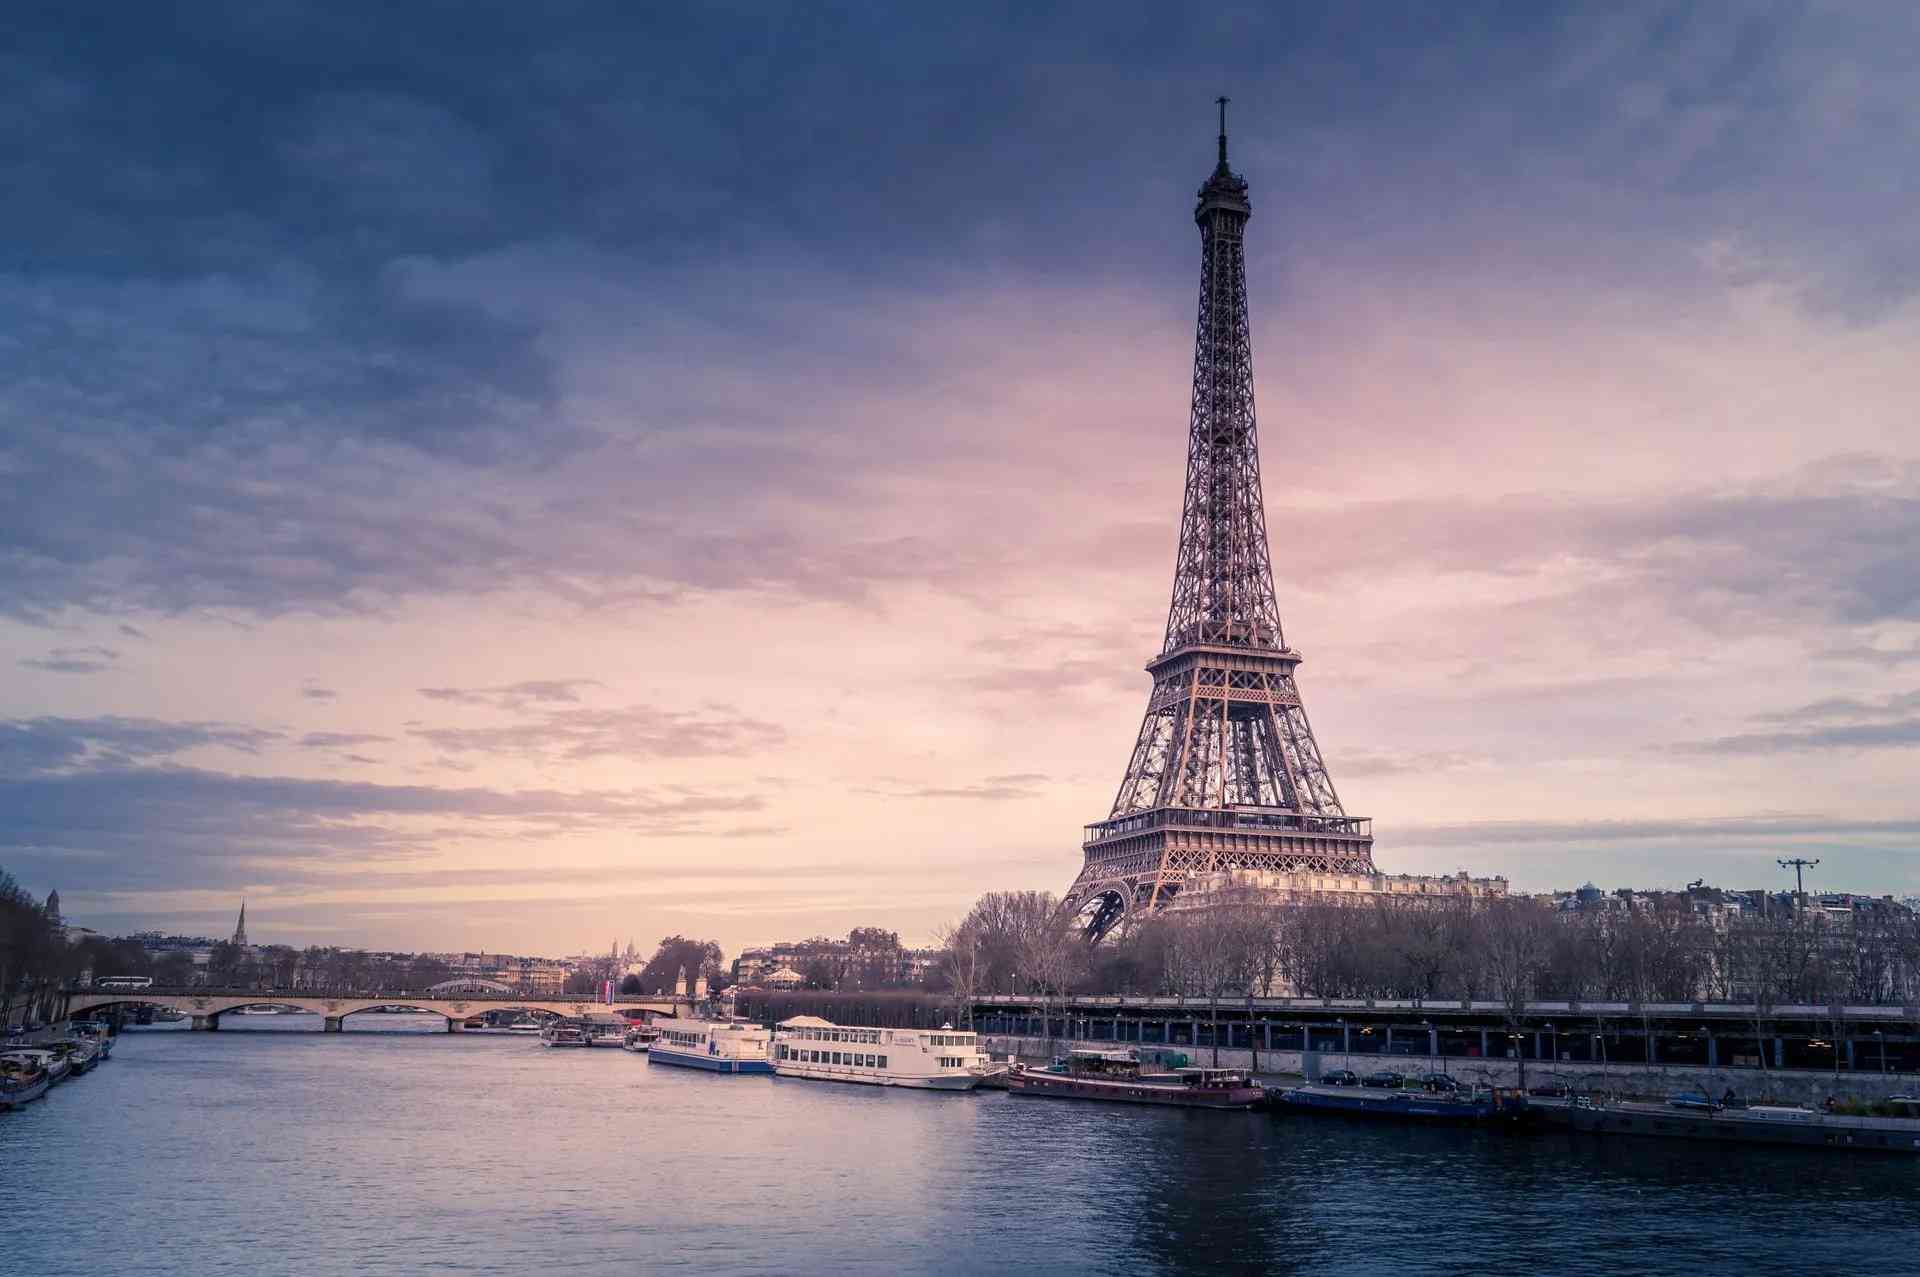 The Eiffel Tower is one of the popular structures in the world today.